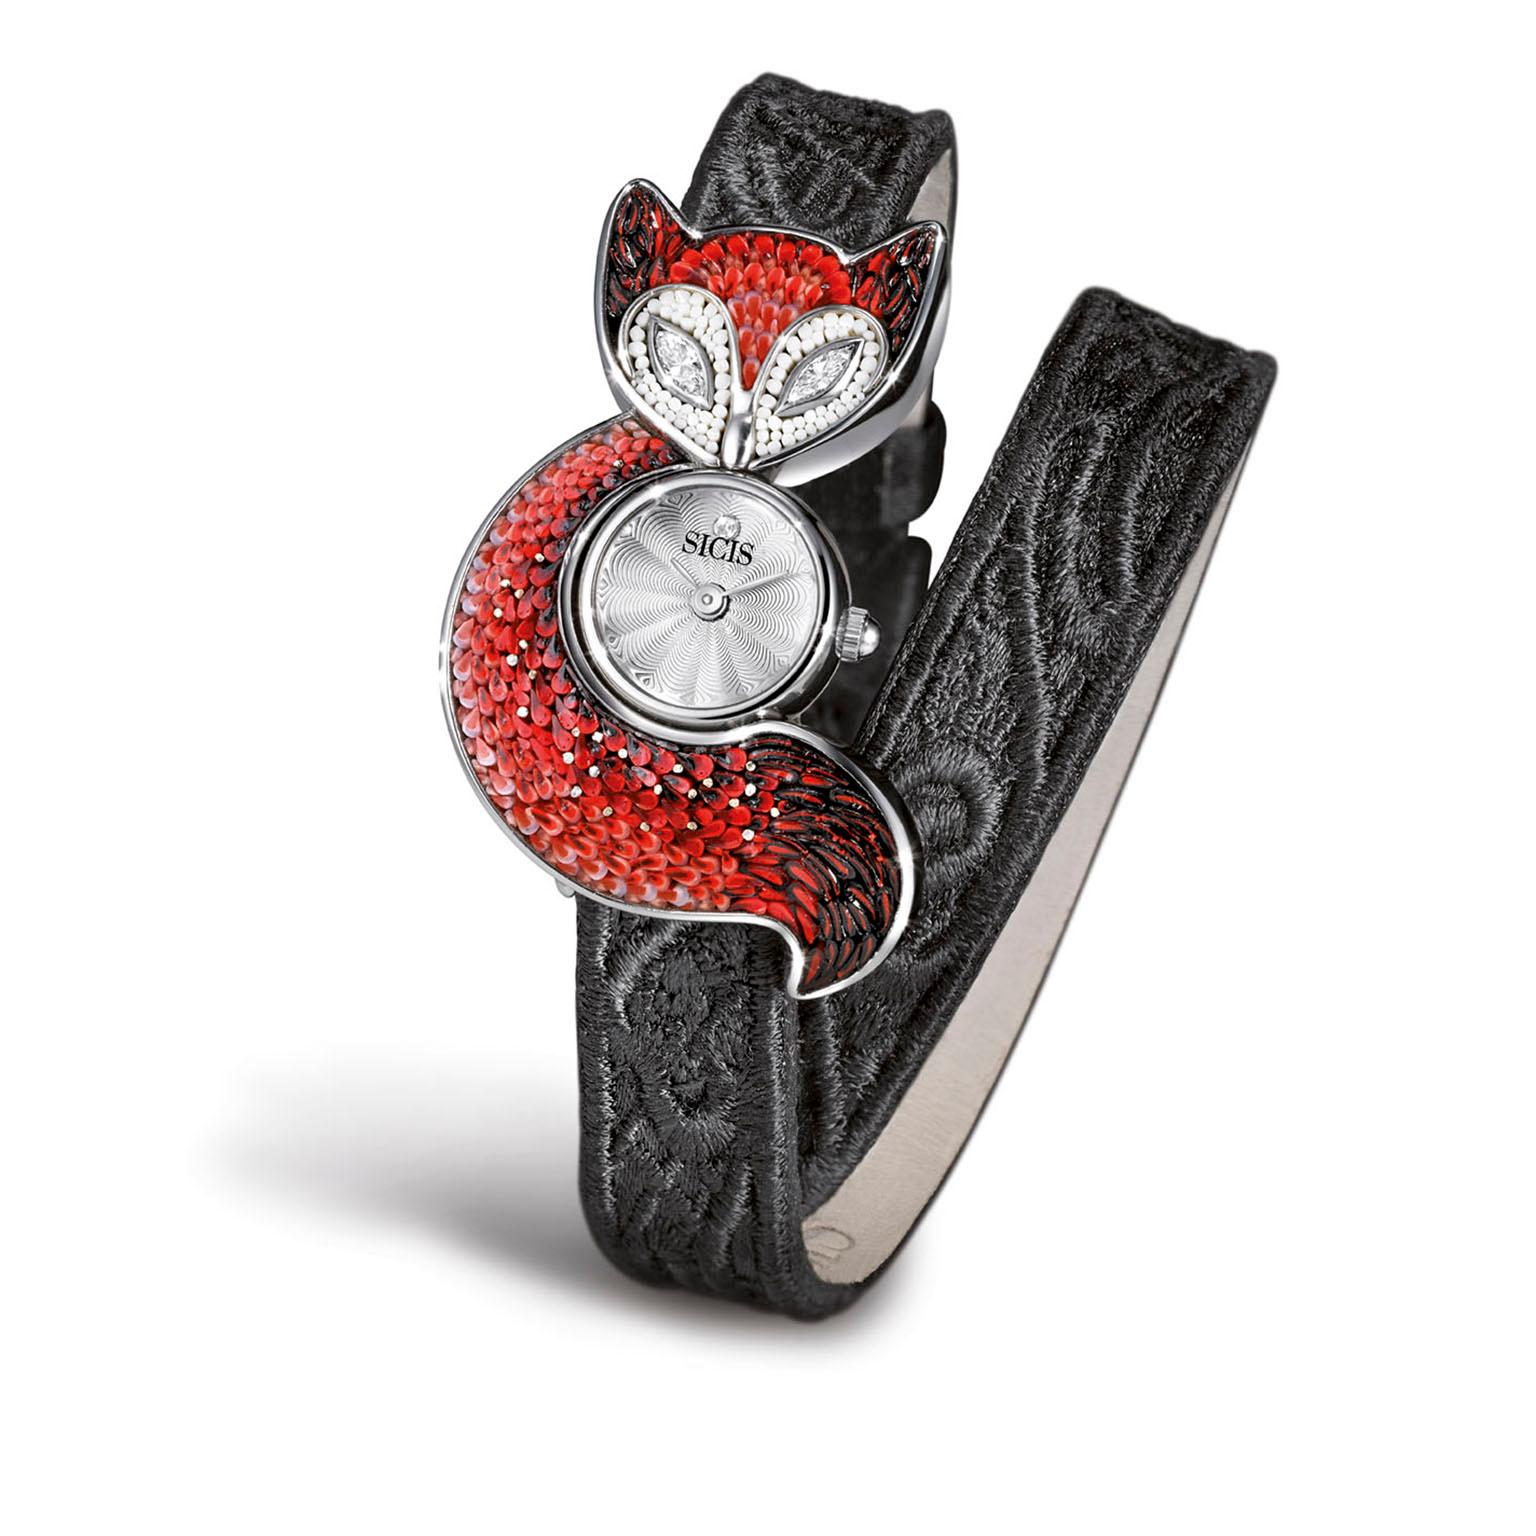 Contemporary Stylis Wristwatch Steel Case White Diamond Handmade Decorated Micromosaic  For Sale